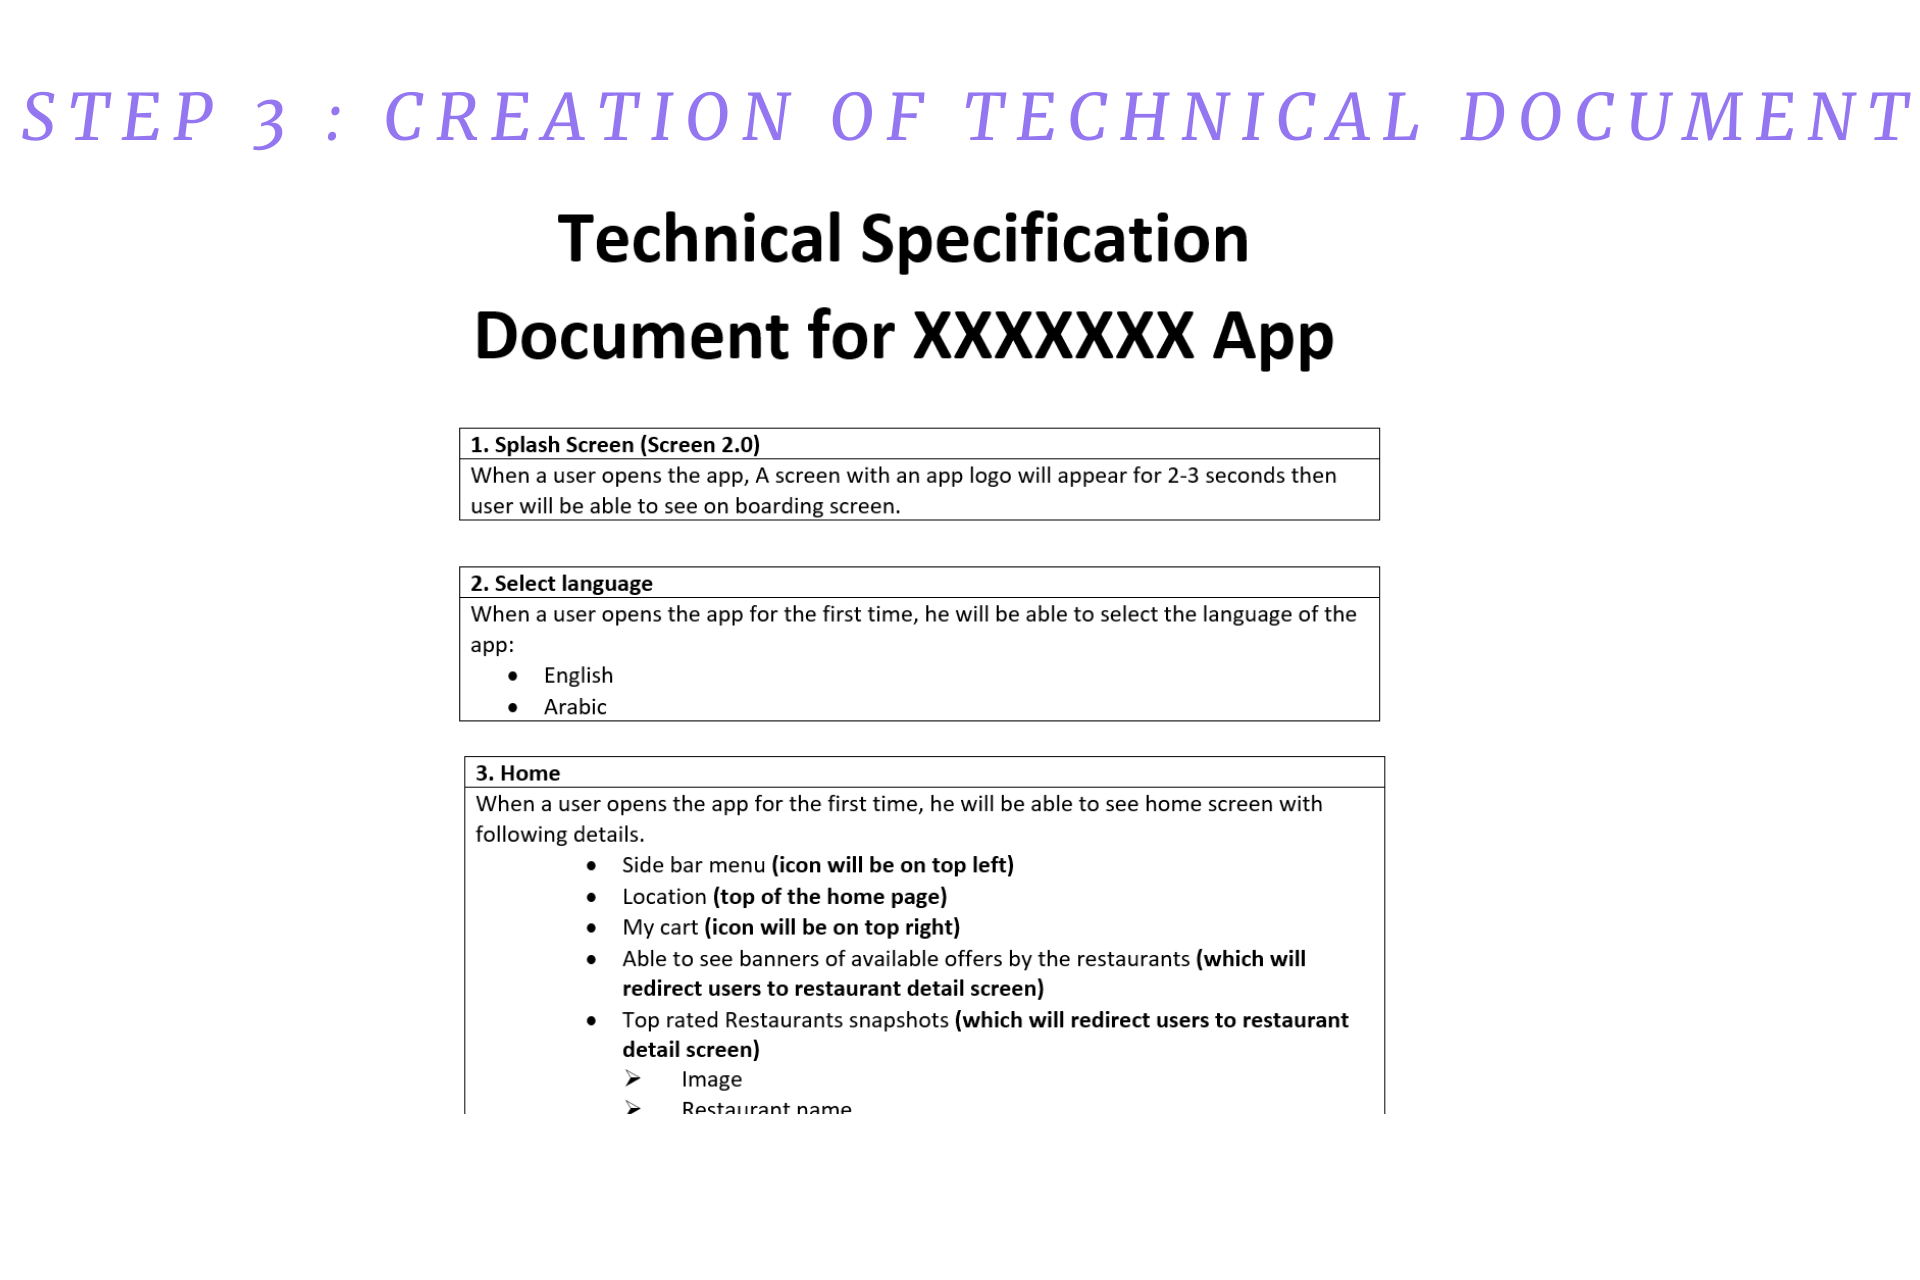 Creation of Detailed Technical Document